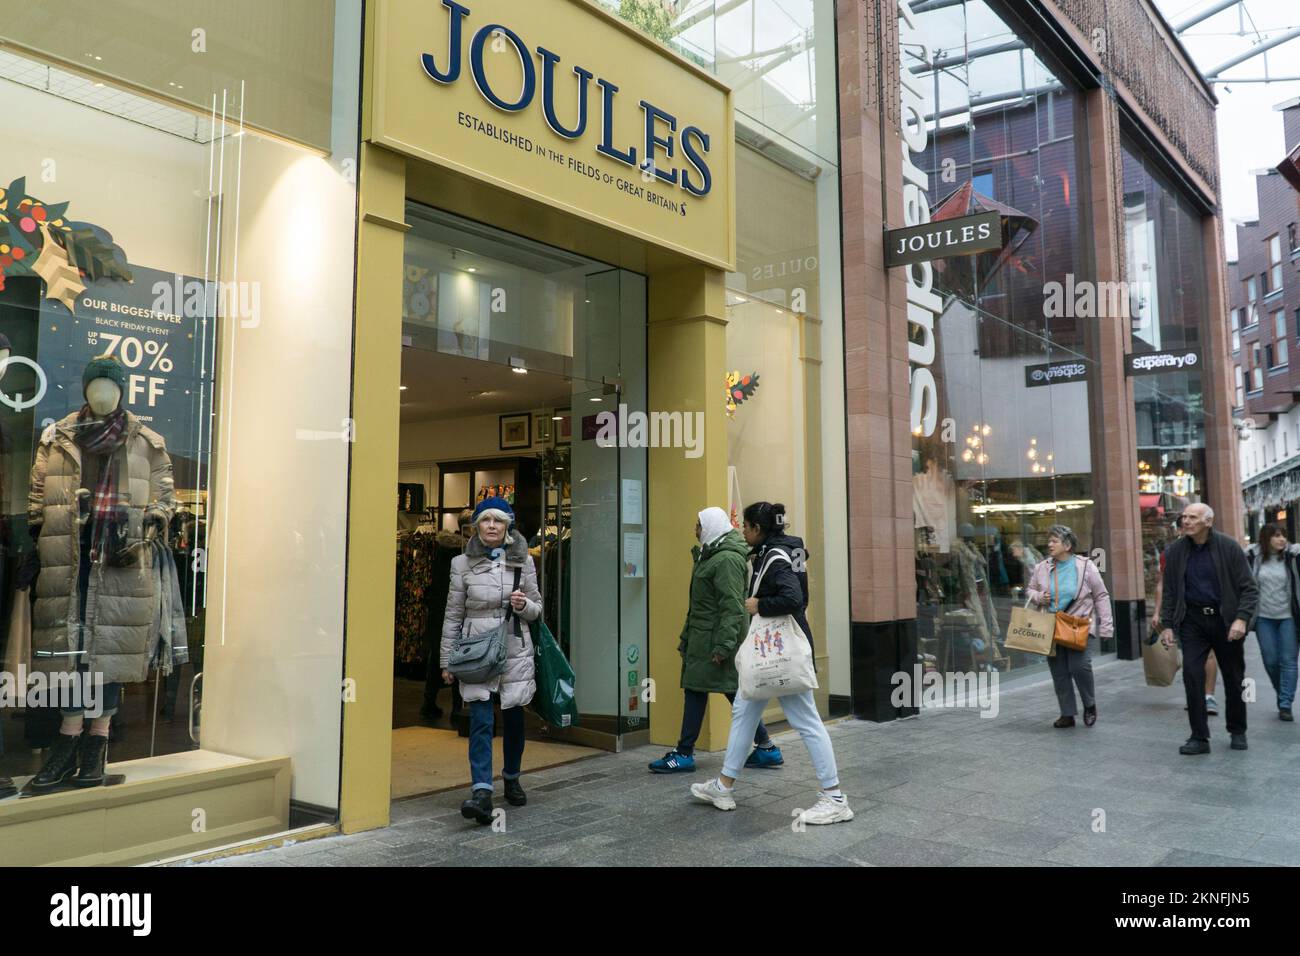 Exeter, UK, 16 November 2022: shoppers at a branch of clothing store Joules in Princesshay shopping centre. The chain is operating under the control of administrators. Anna Watson/Alamy Live News Stock Photo